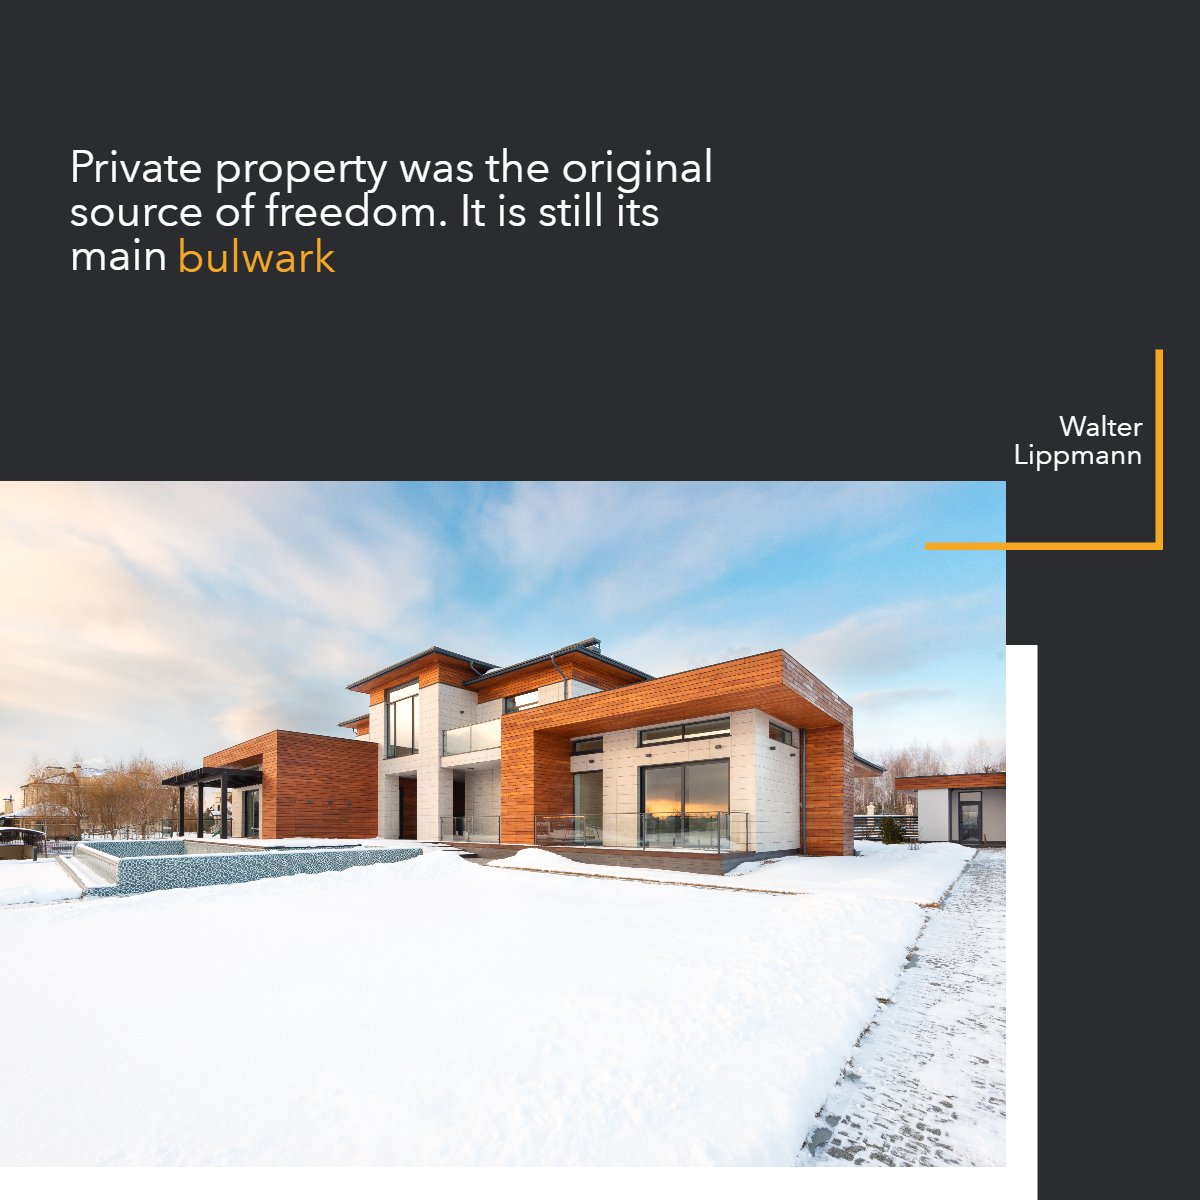 'Private property was the original source of freedom. It still is its main bulwark.' — Walter Lippmann 📖 #quoteoftheday #quotestagram #lifequotes #realestate #quotes #WalterLippmann #realestate